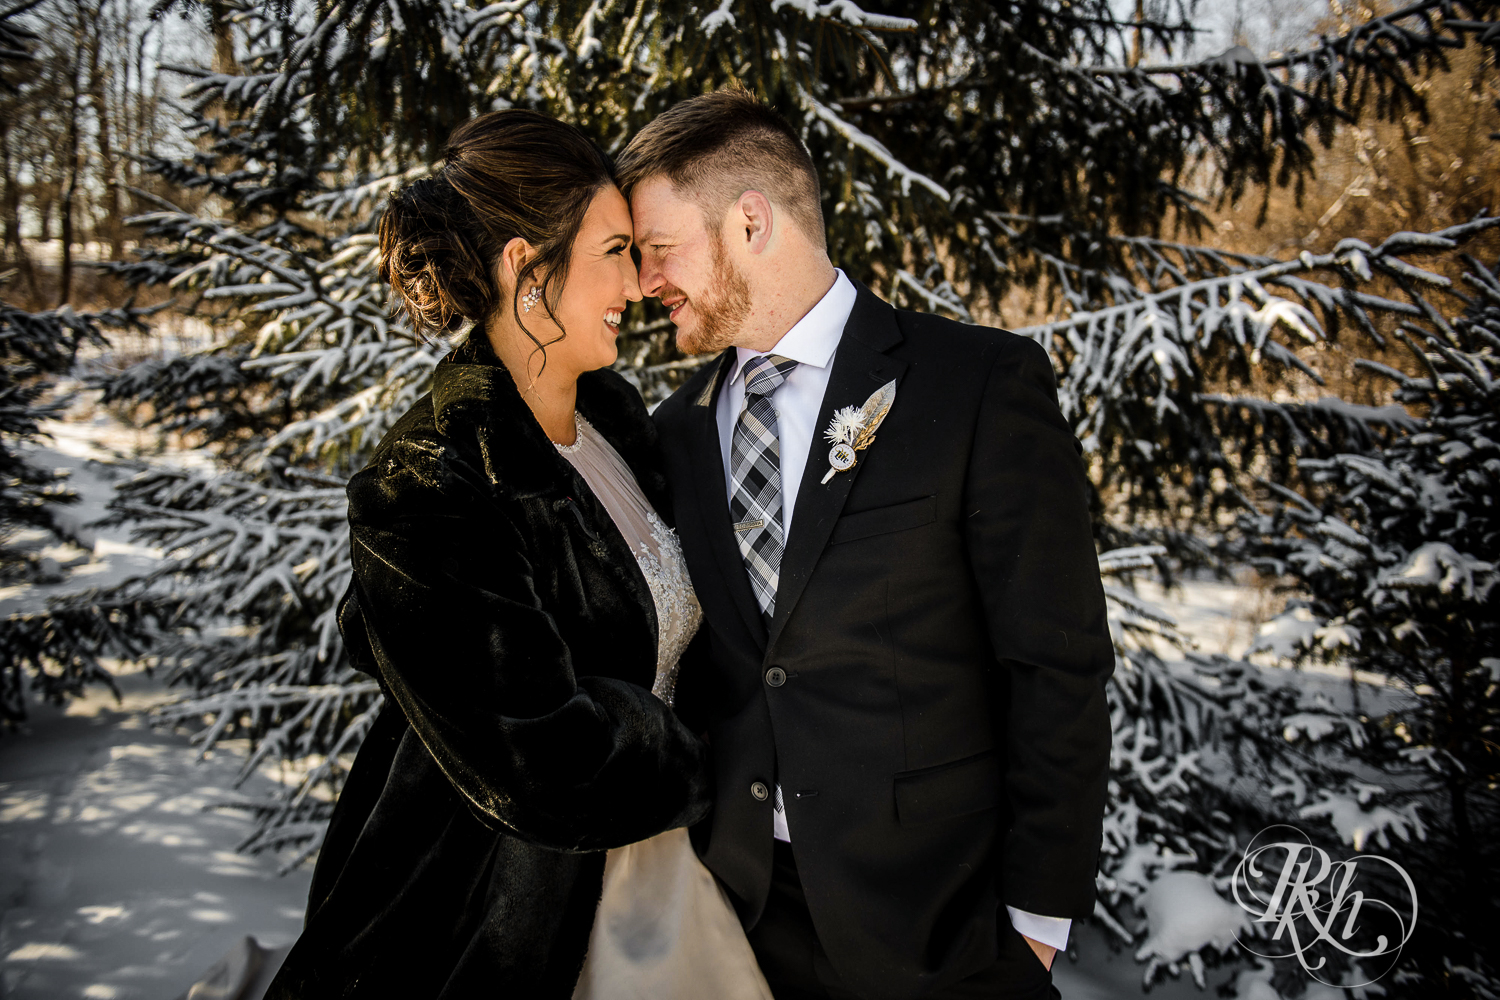 Bride and groom smile in the snow during winter wedding at Creekside Farm in Rush City, Minnesota.